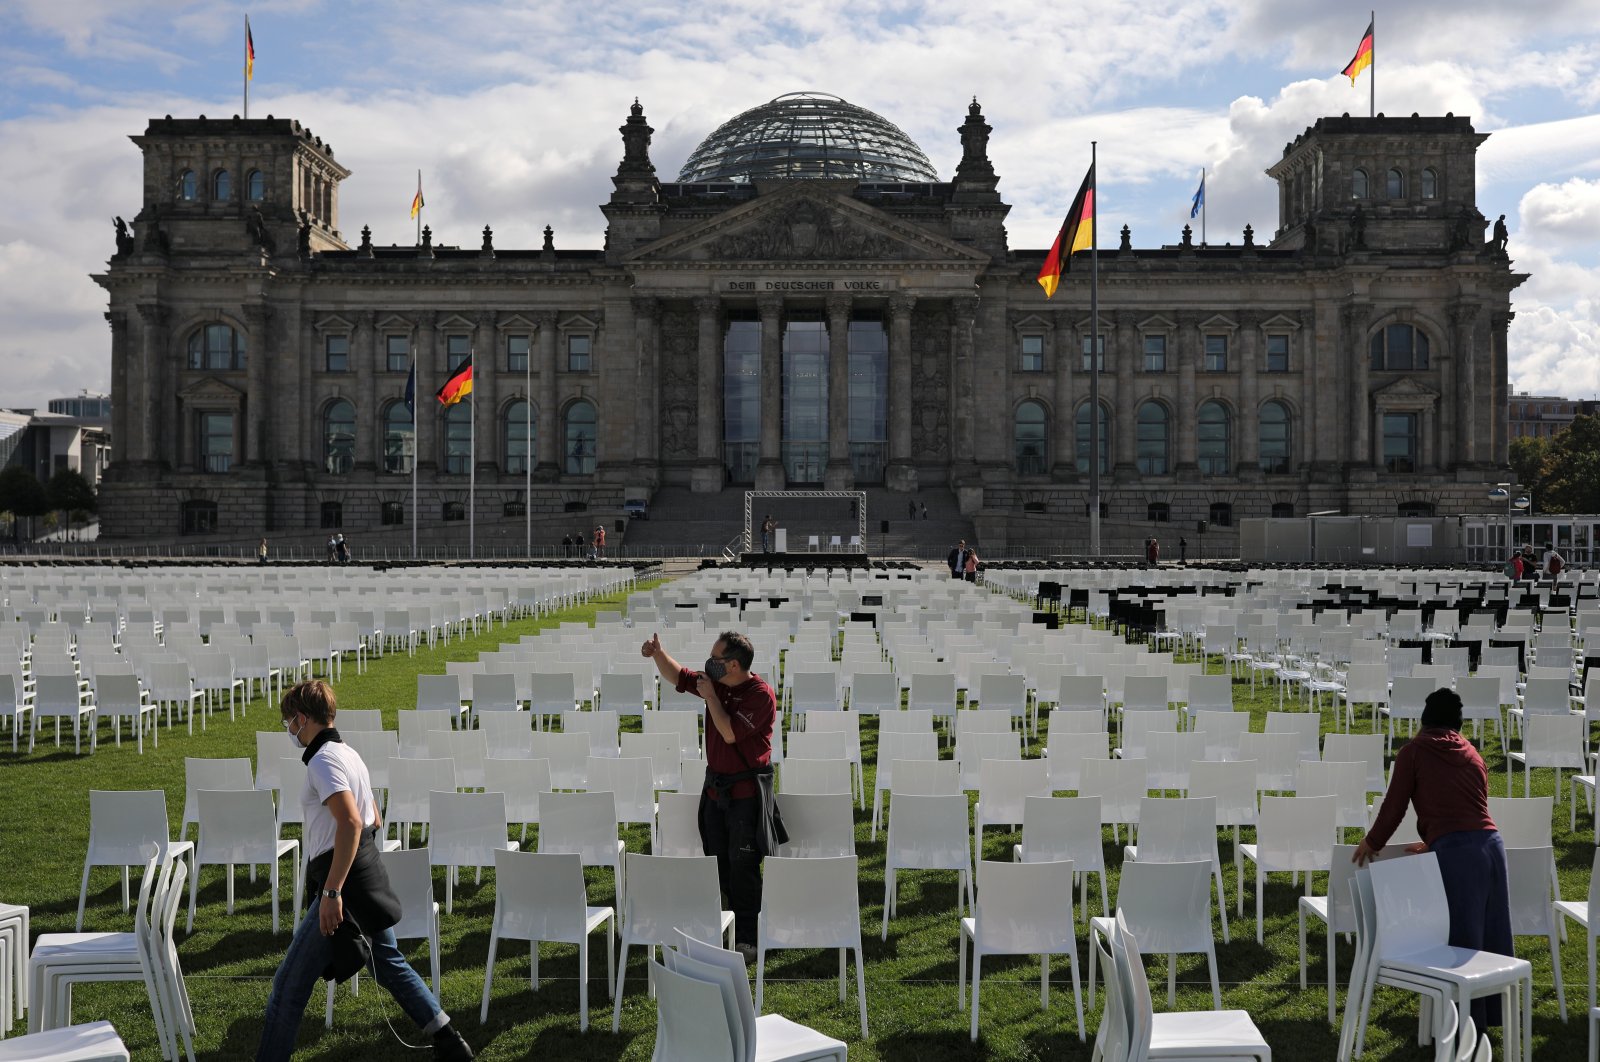 Activists set up empty chairs for a protest demanding the evacuation of Greek migrant camps, in front of the Reichstag building in Berlin, Germany, September 7, 2020. (Reuters Photo)